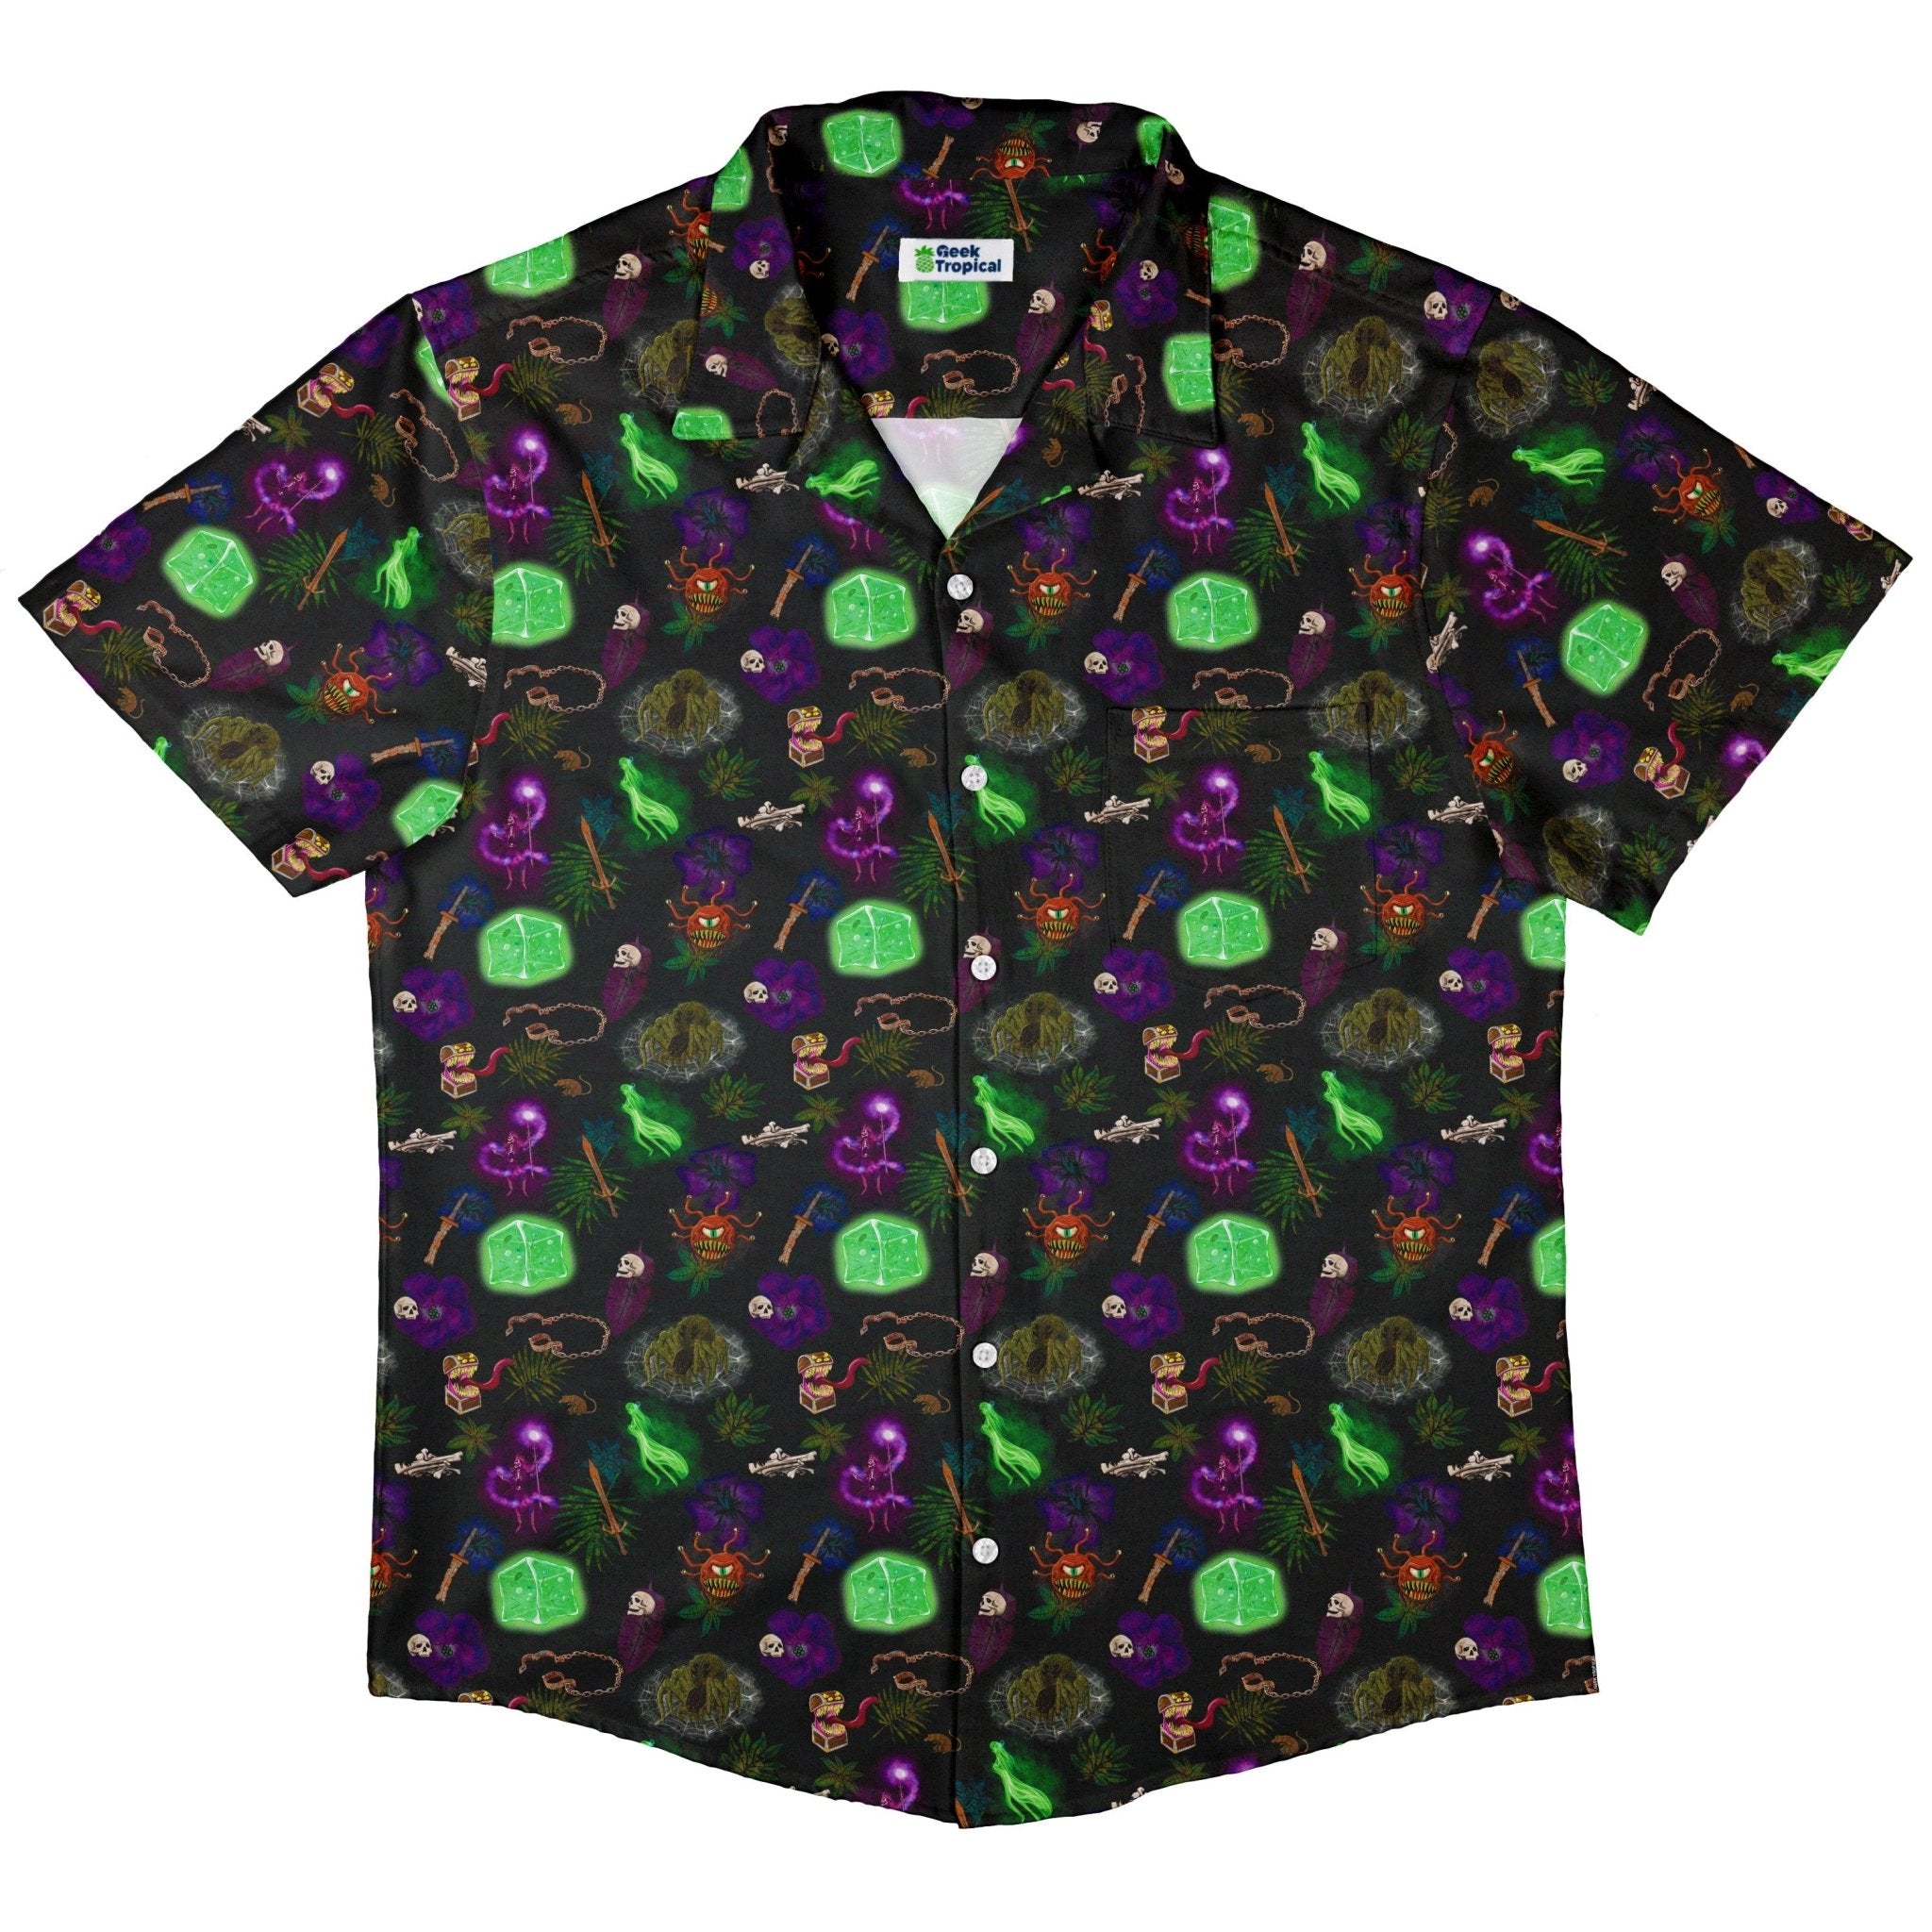 Dnd Dungeon Monsters Button Up Shirt - adult sizing - Designs by Nathan - dnd & rpg print